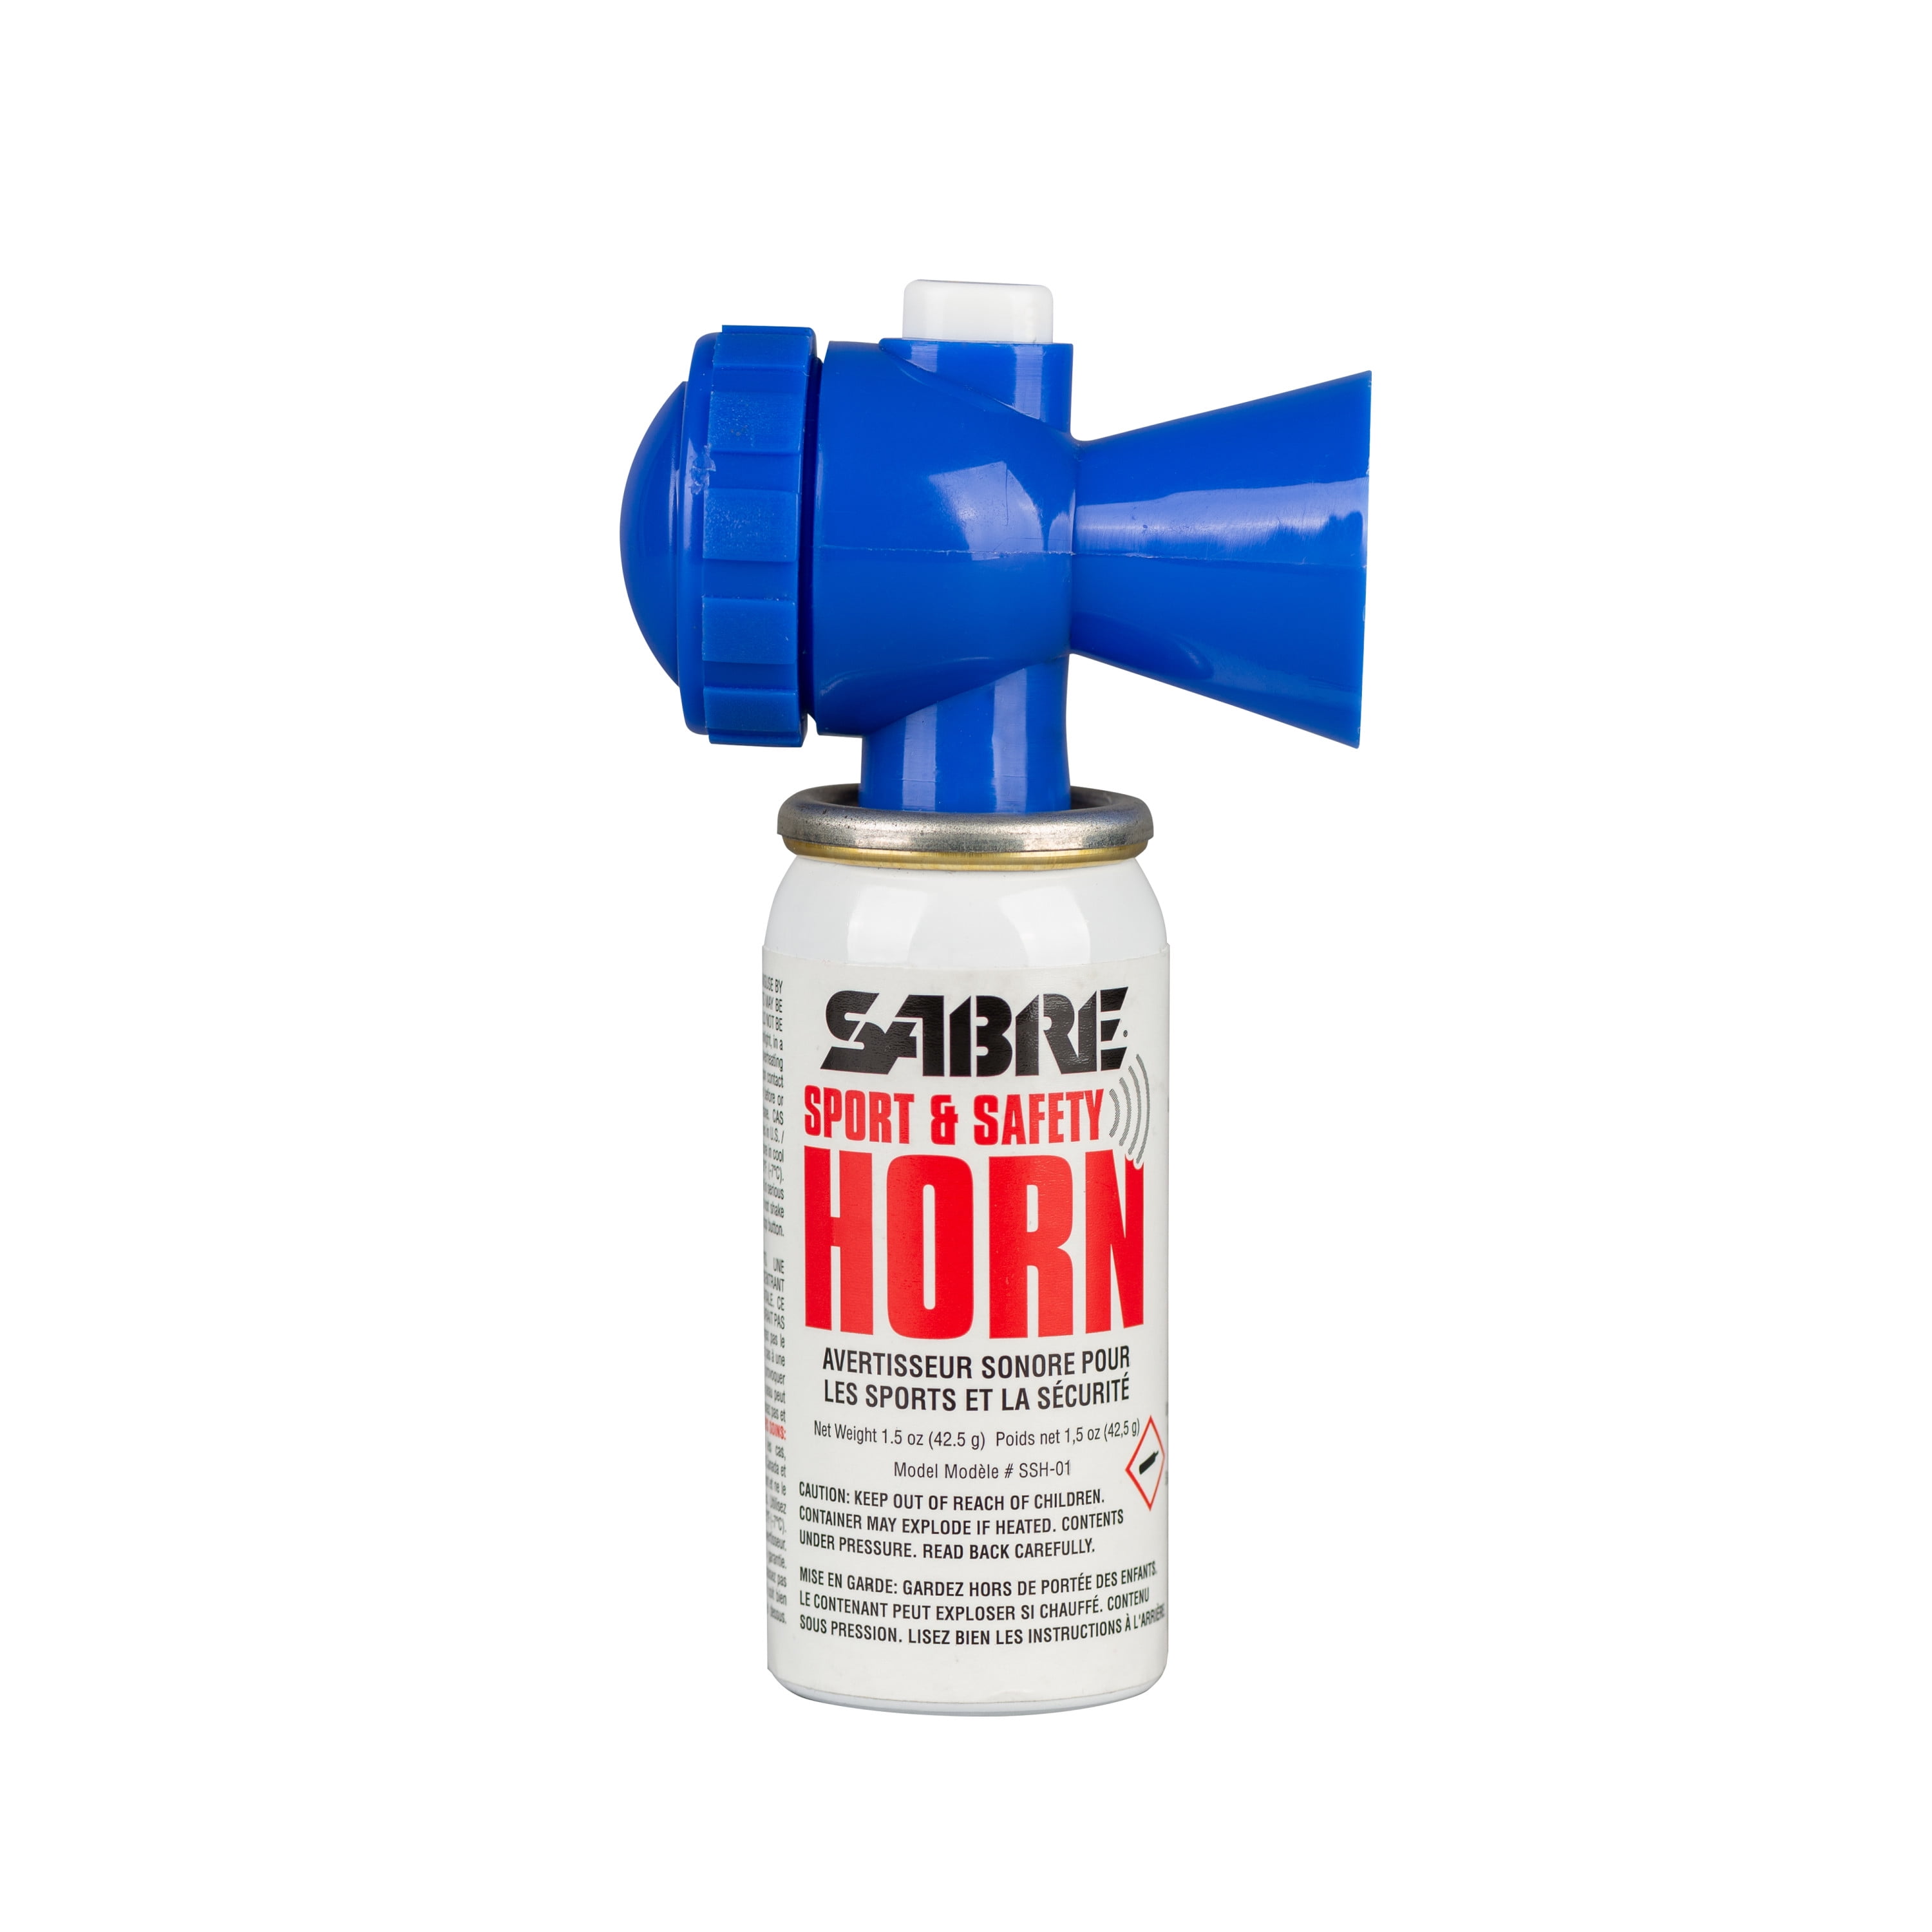 Air horn Portable hand held security safety Party Sports boat LOUD BLAST  3.5 OZ*